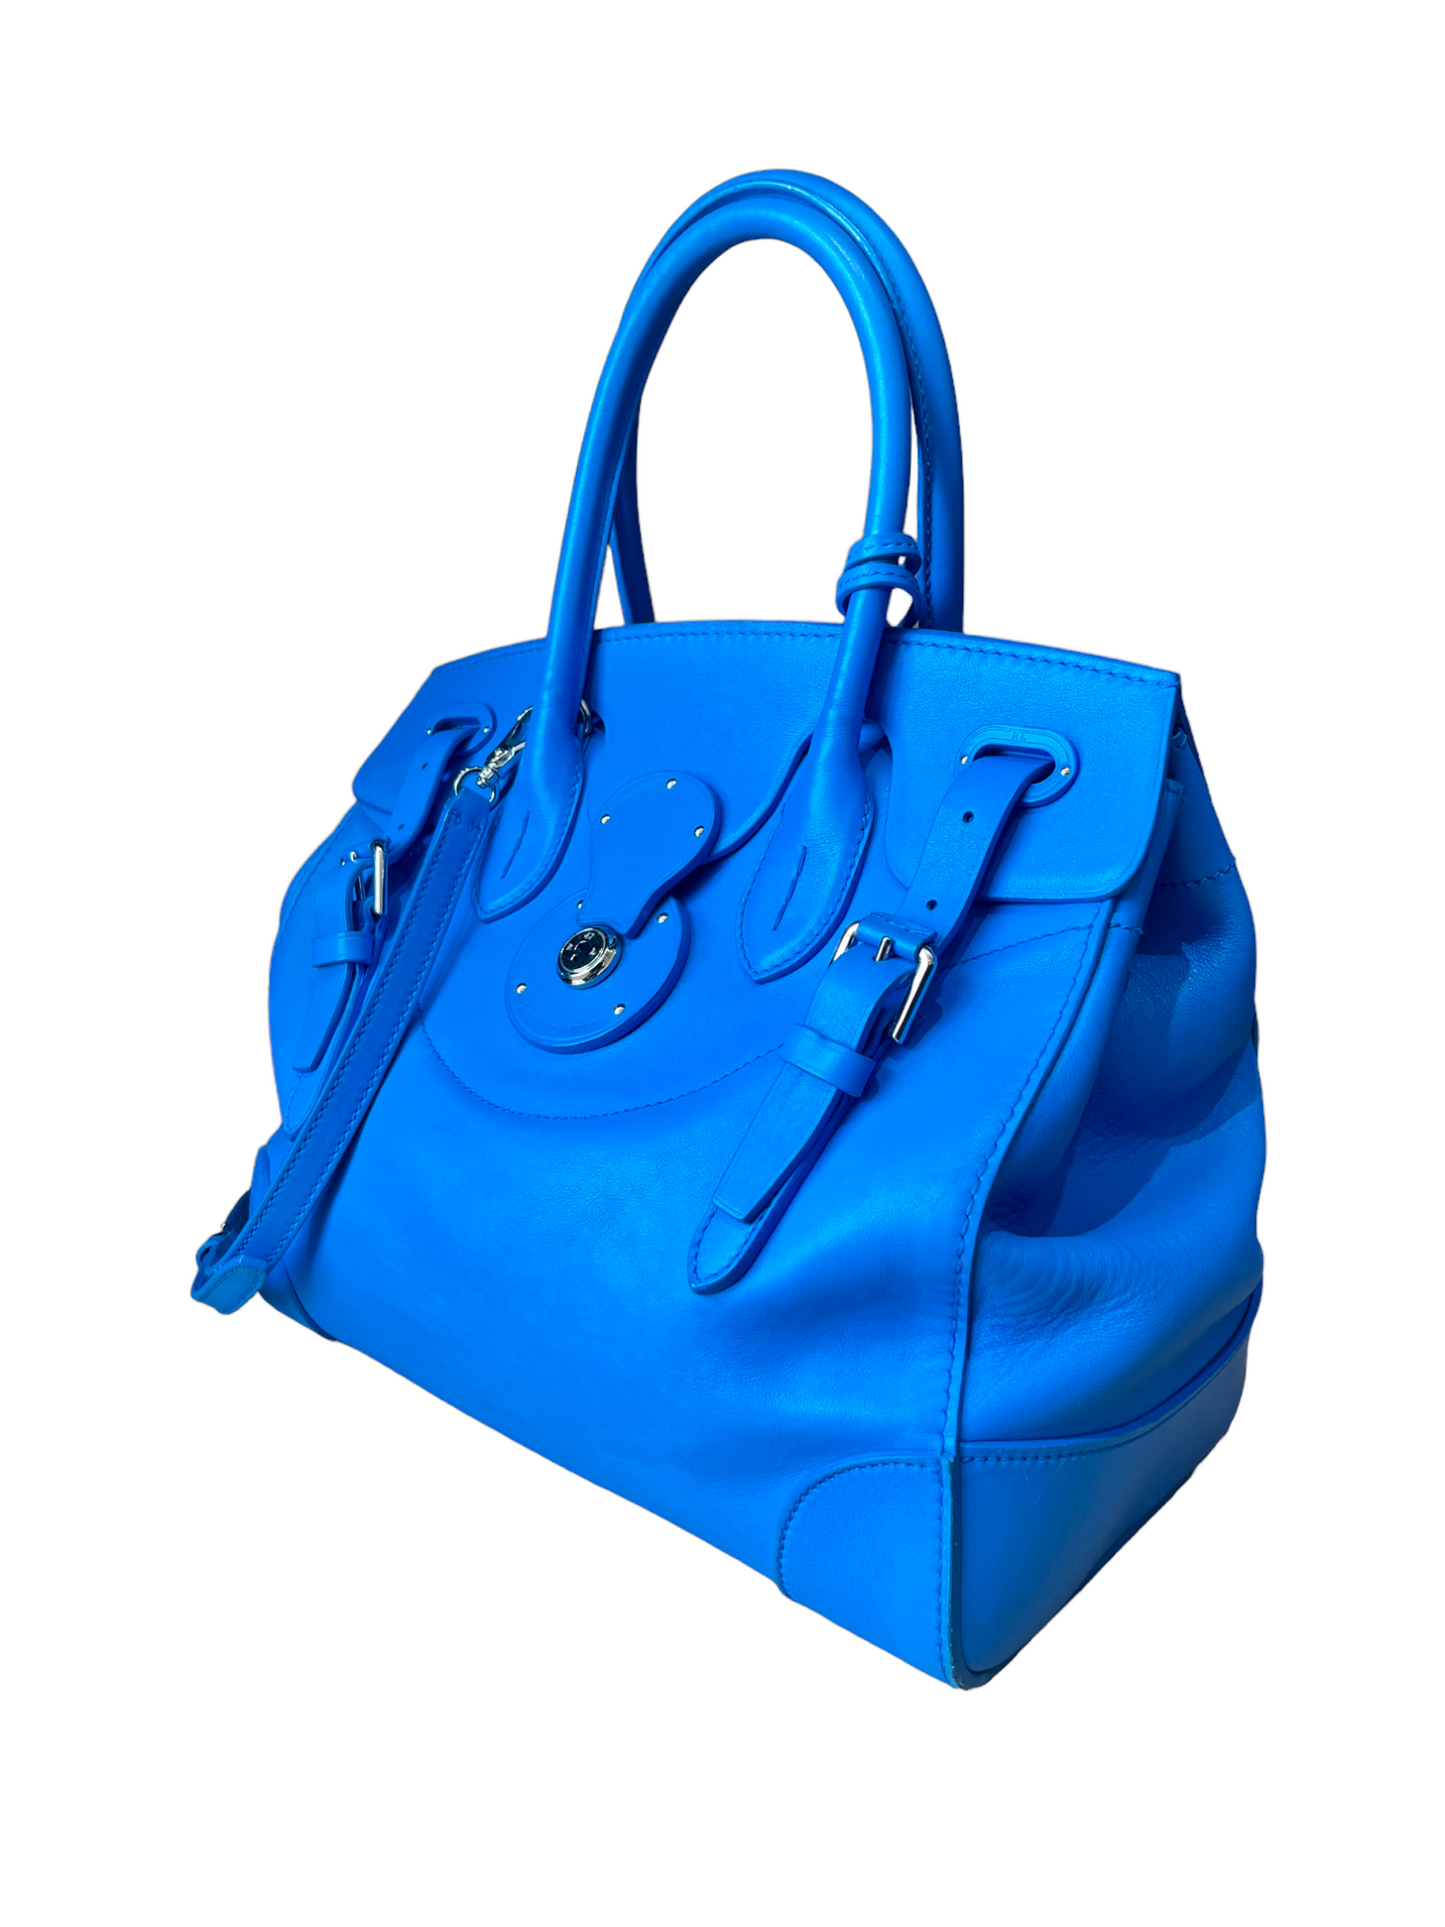 Ralph Lauren Ricky Leather Tote Bag